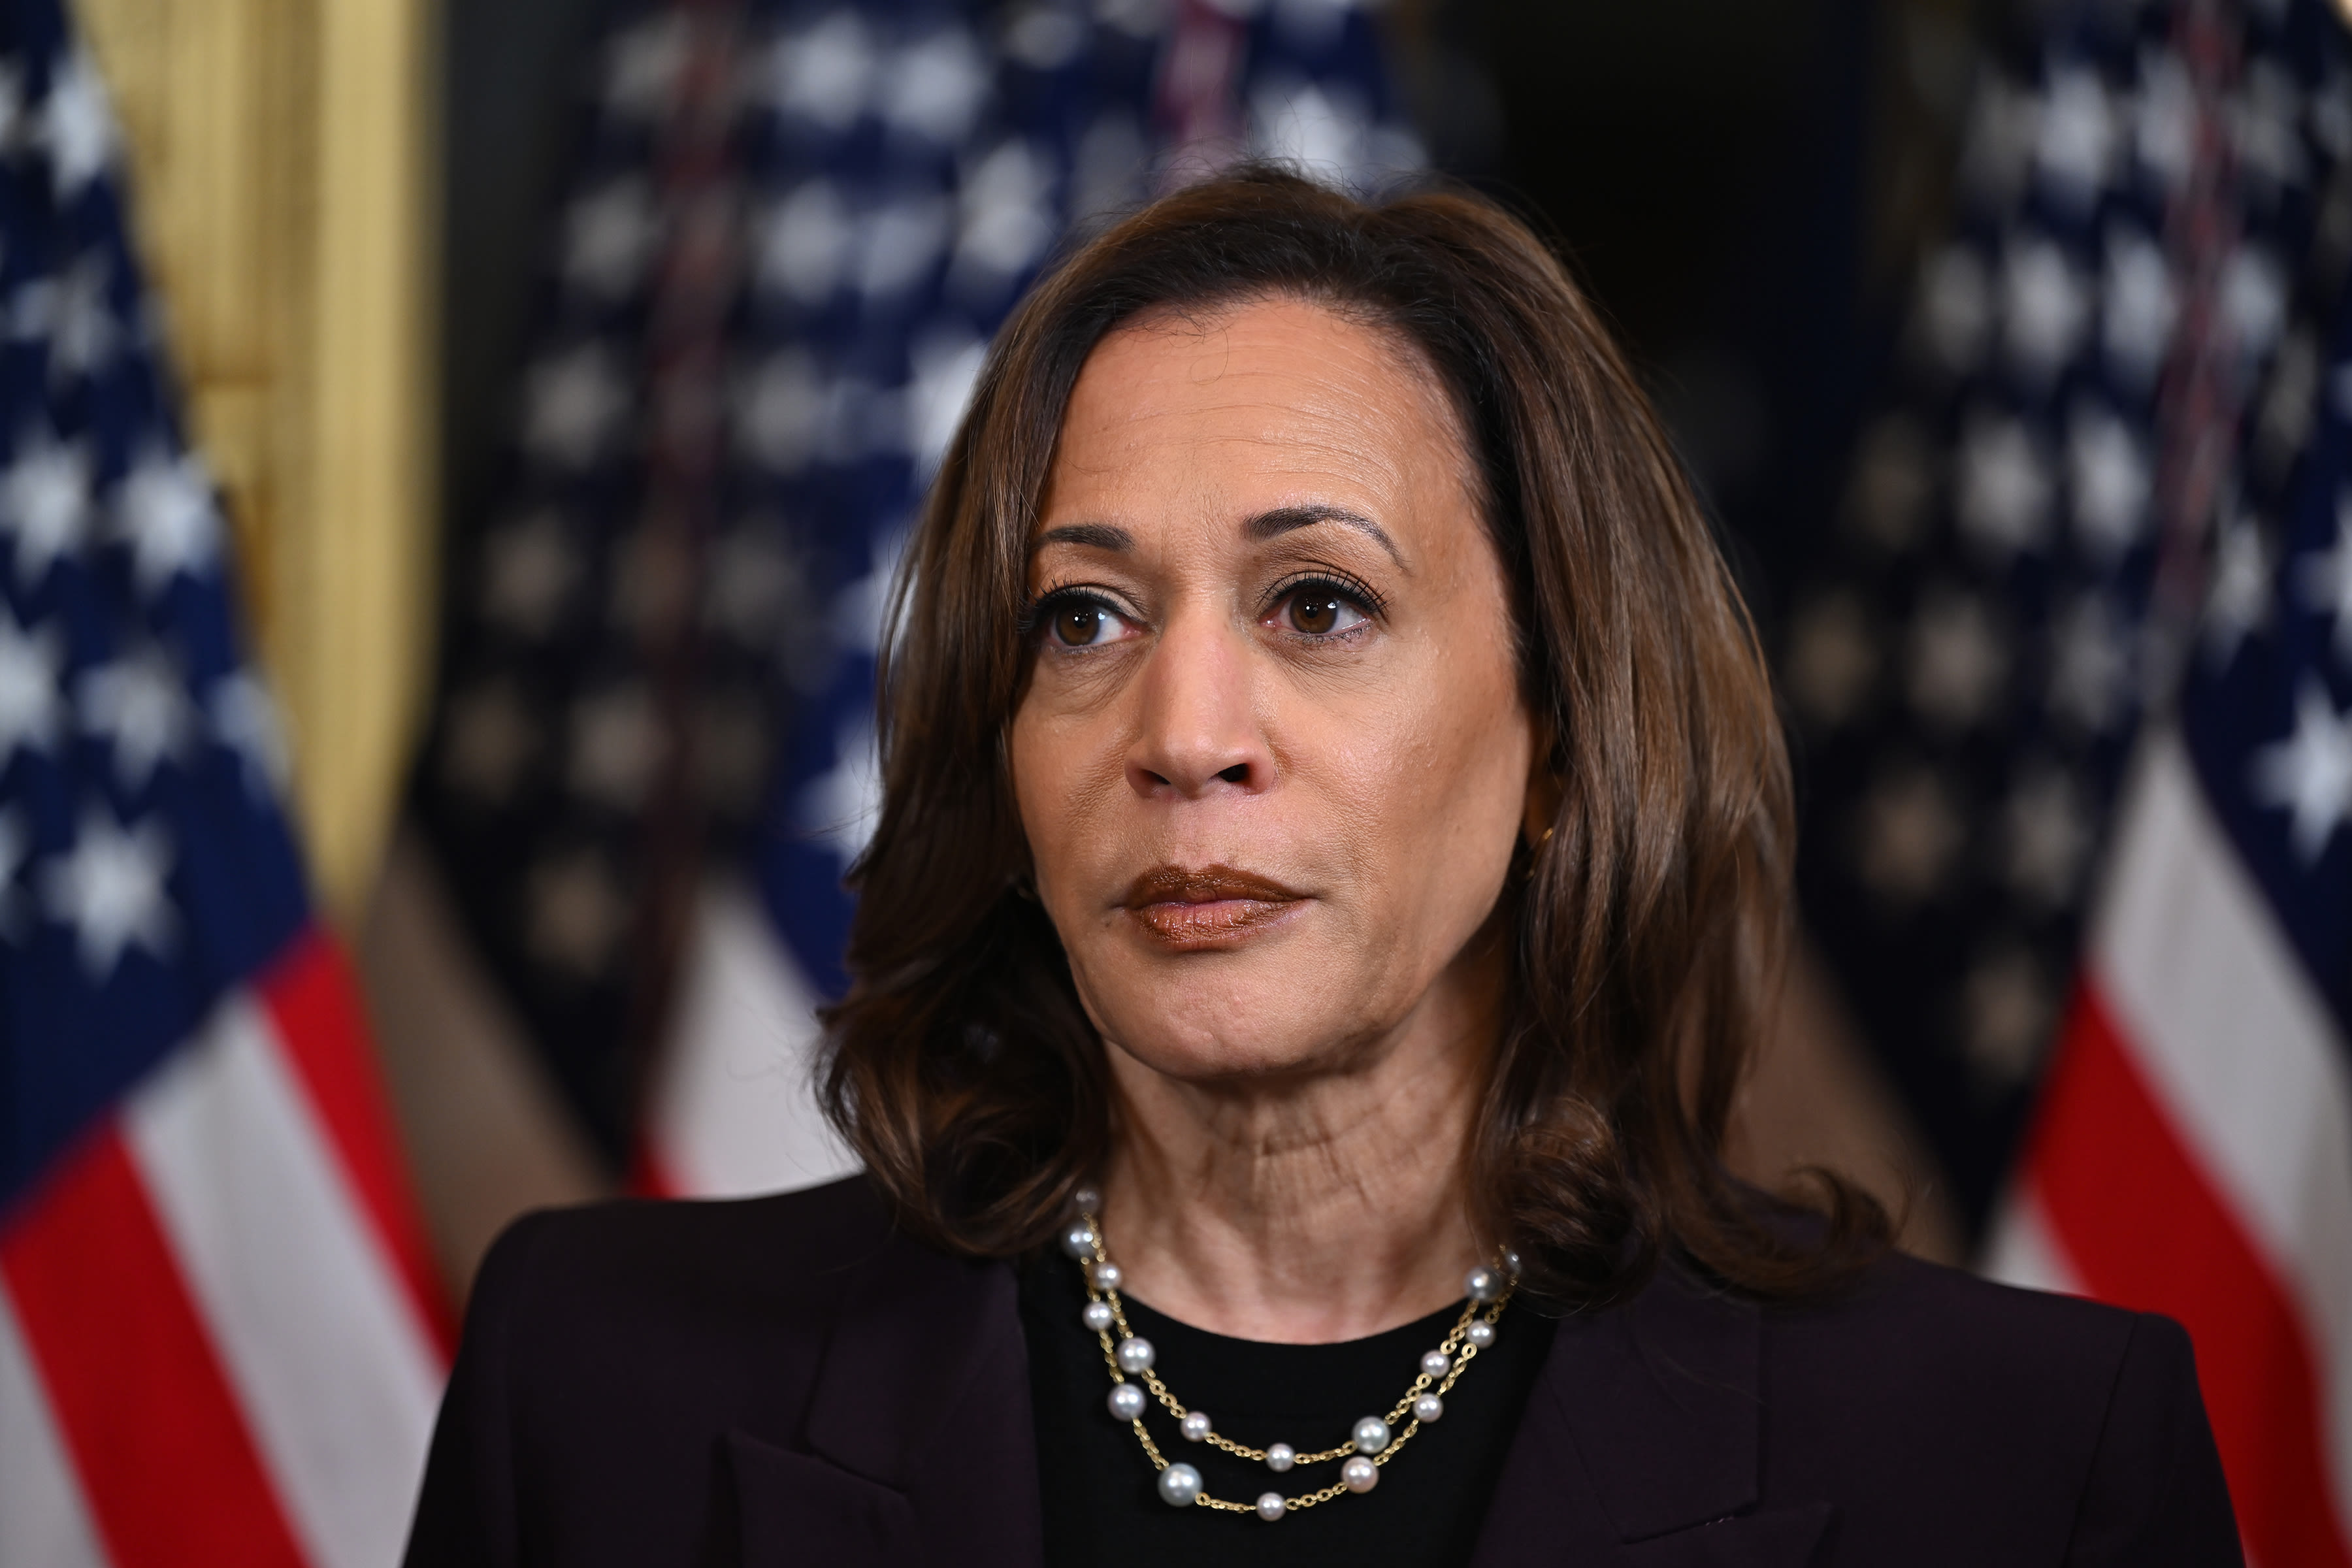 The Quiet Bond Kamala Harris Forged With 3 VP Contenders